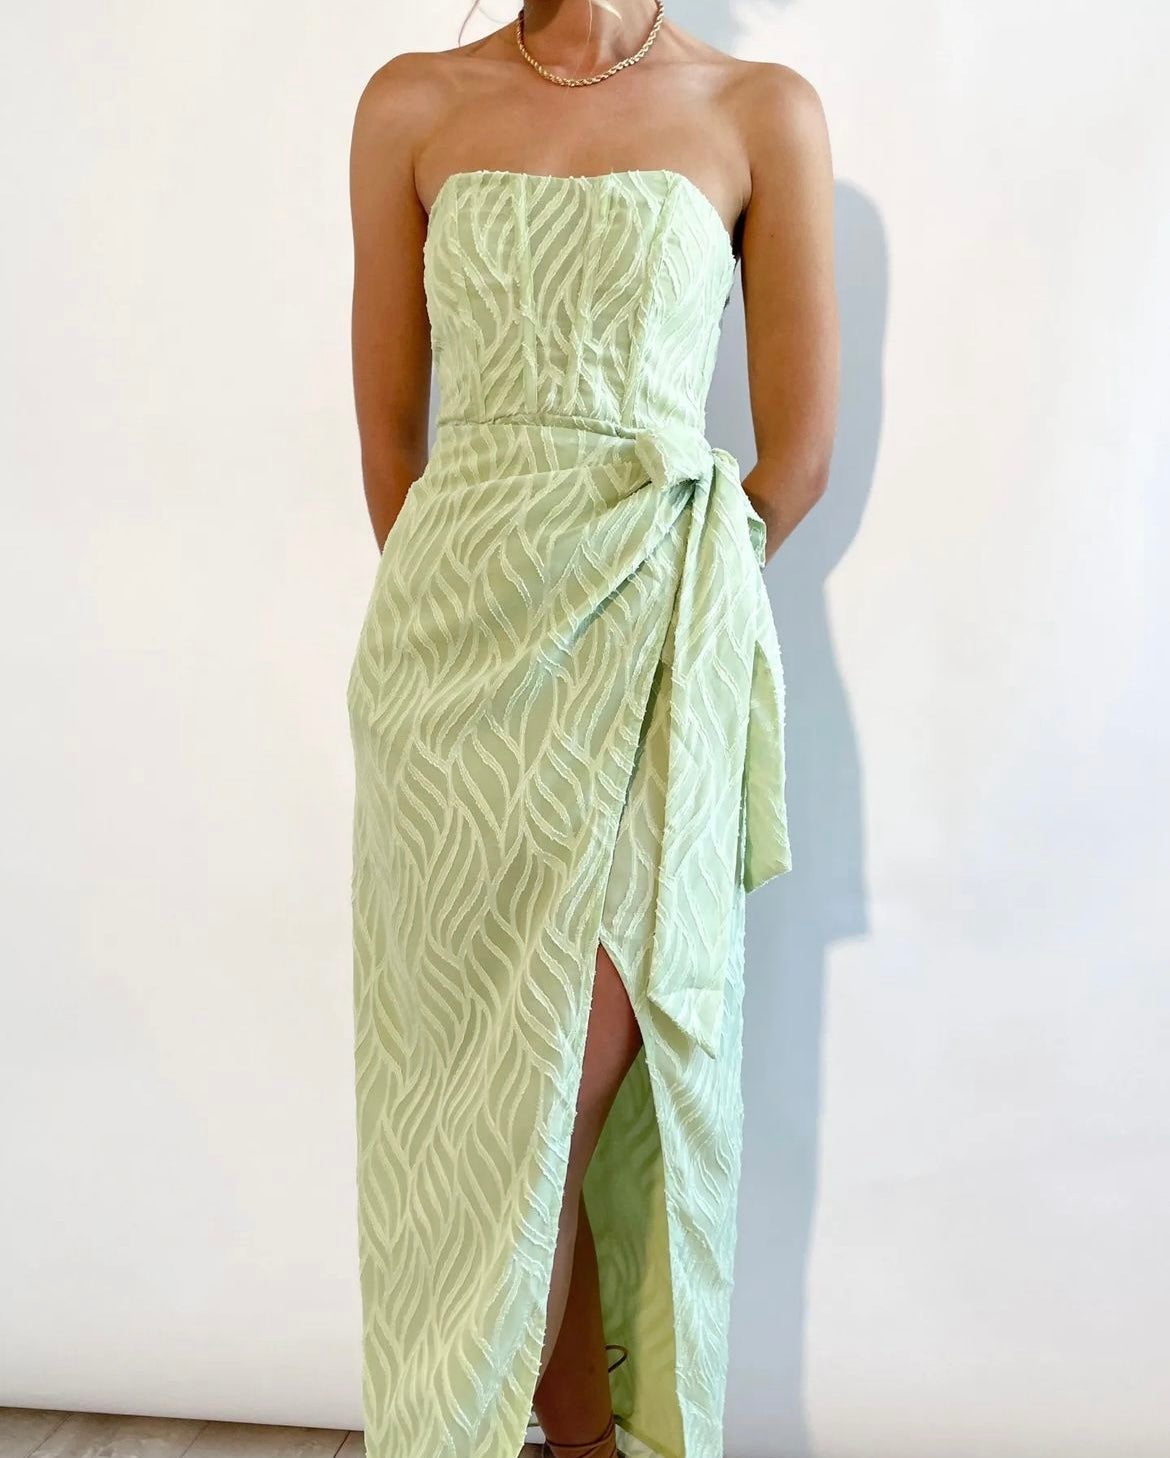 All About May - Green Strapless Dress